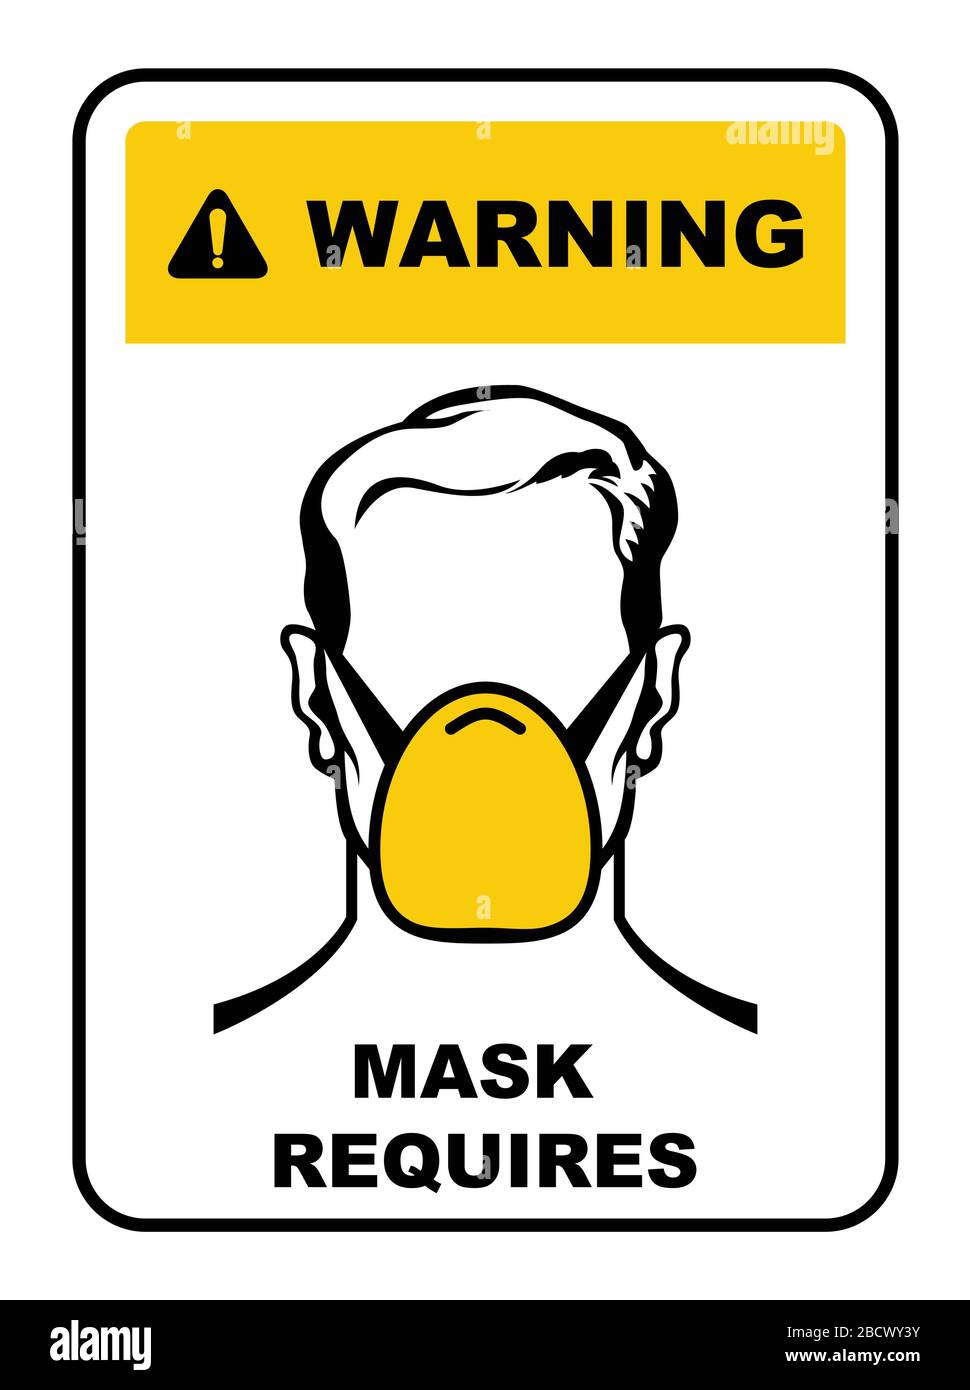 Warning sign - face mask required, wear medical mask information poster or plate Stock Vector